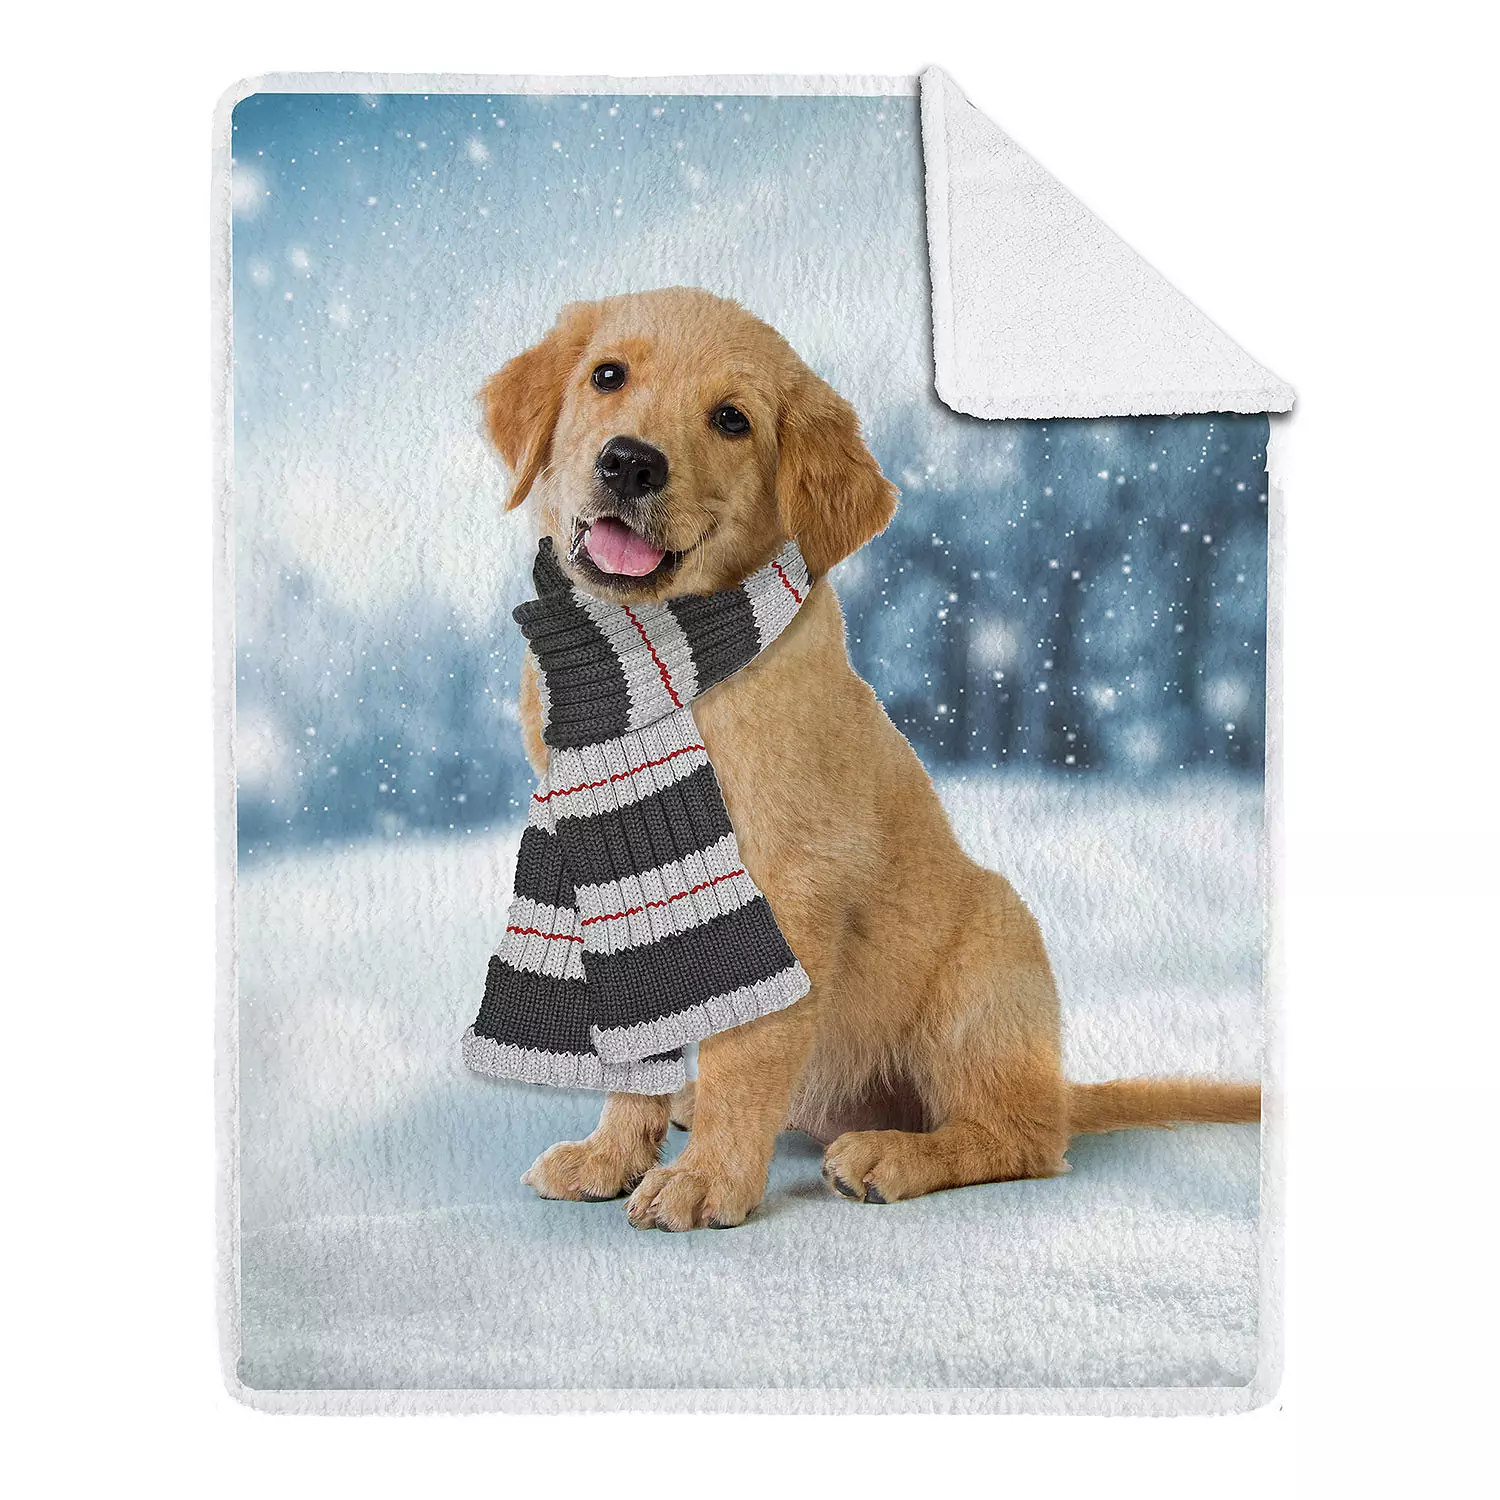 Printed photoreal throw with sherpa backing, dog with scarf, 48"x60"